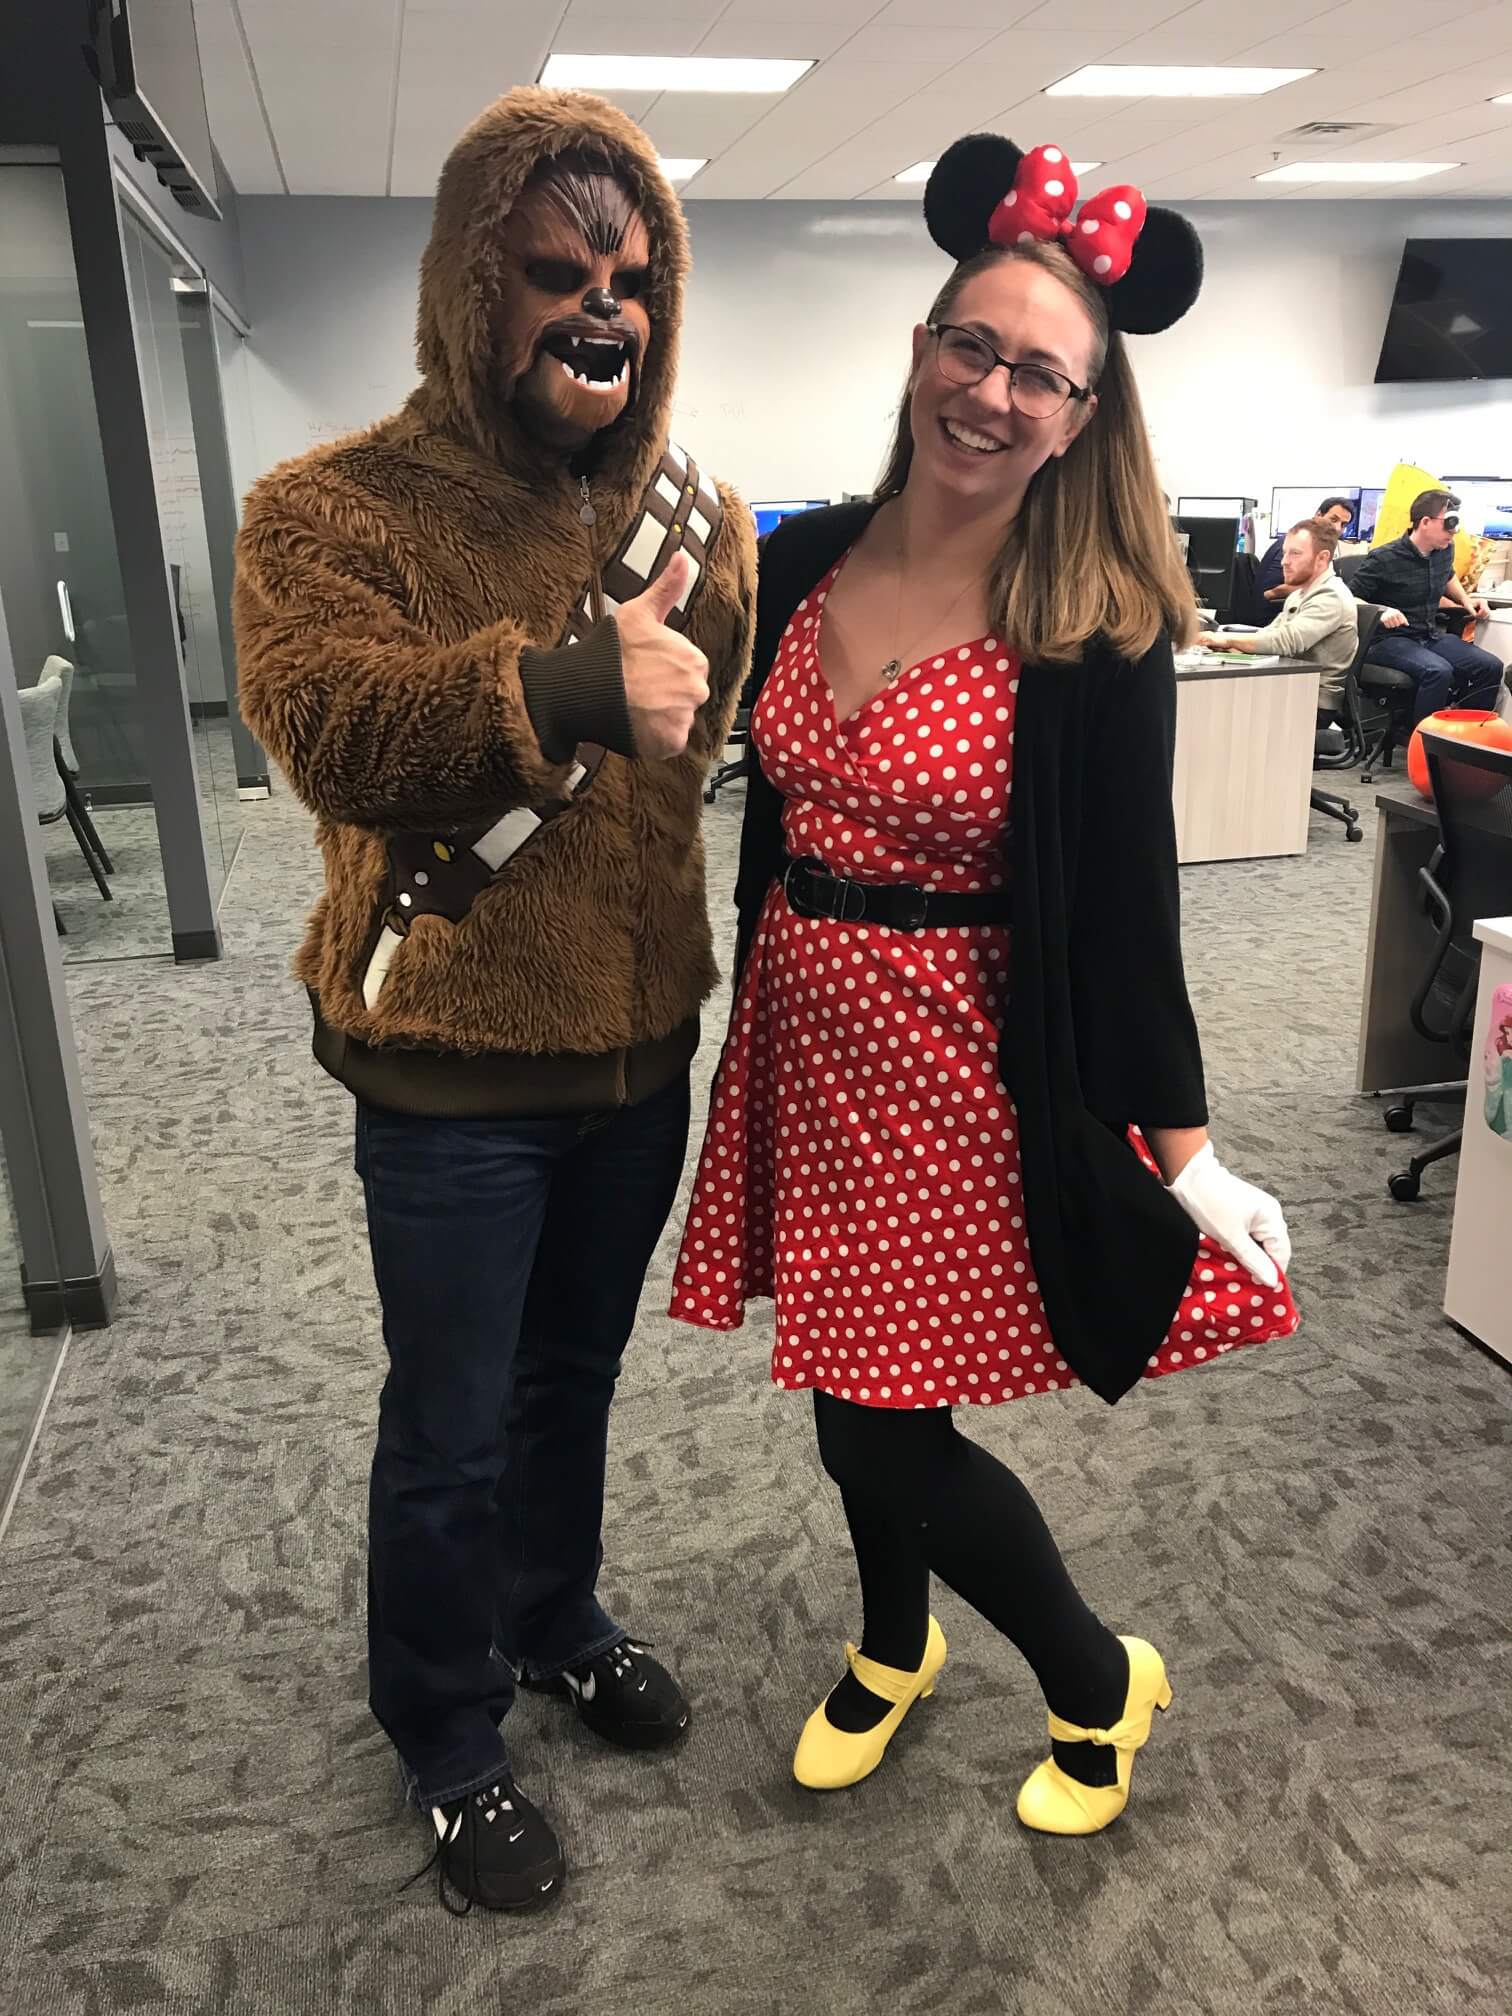 Chewbacca and Minnie Mouse